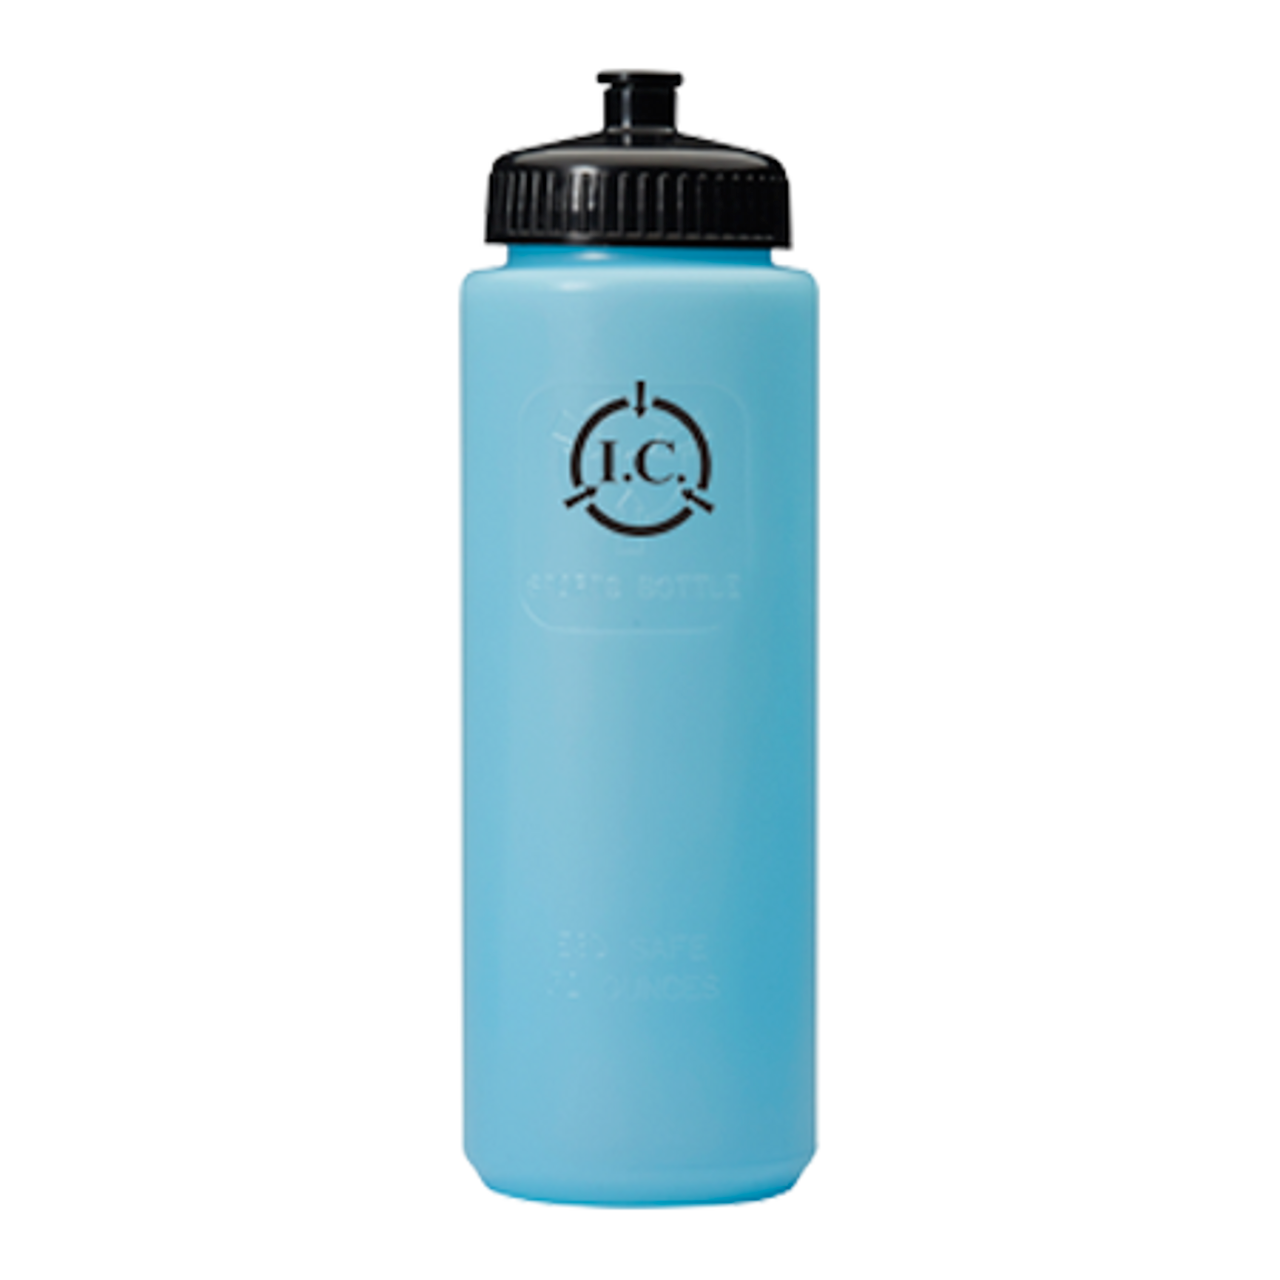 https://cdn11.bigcommerce.com/s-m7m57el3vo/images/stencil/1280x1280/products/28118/40155/RR_ESD_Water_Bottle__38049.1577989830.png?c=2